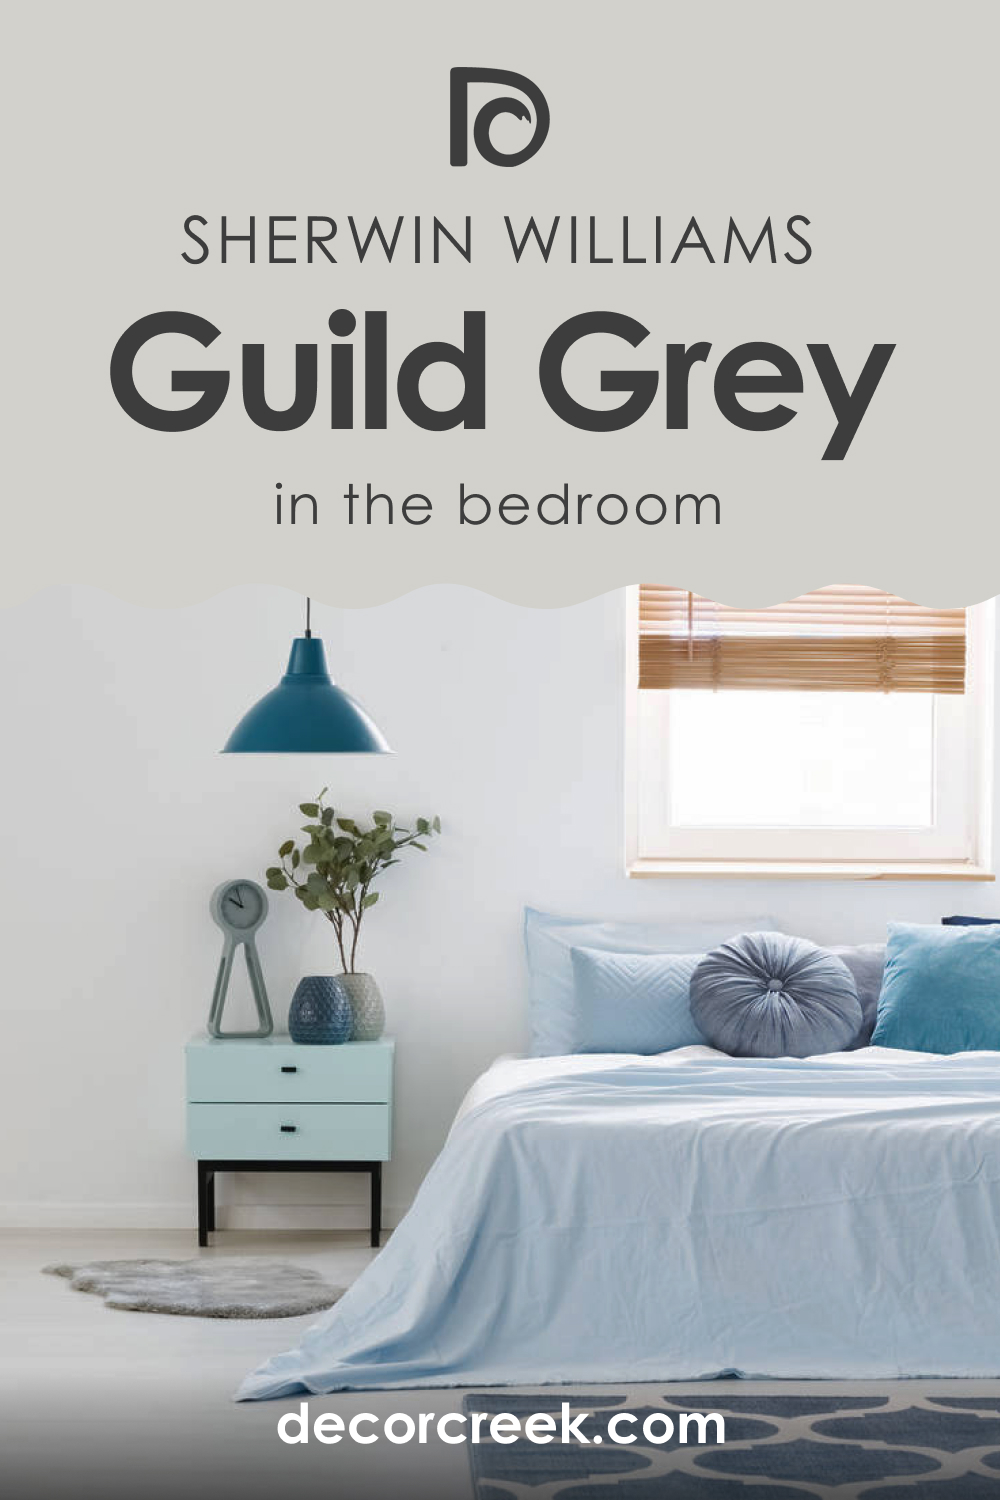 How to Use SW 9561 Guild Grey in the Bedroom?